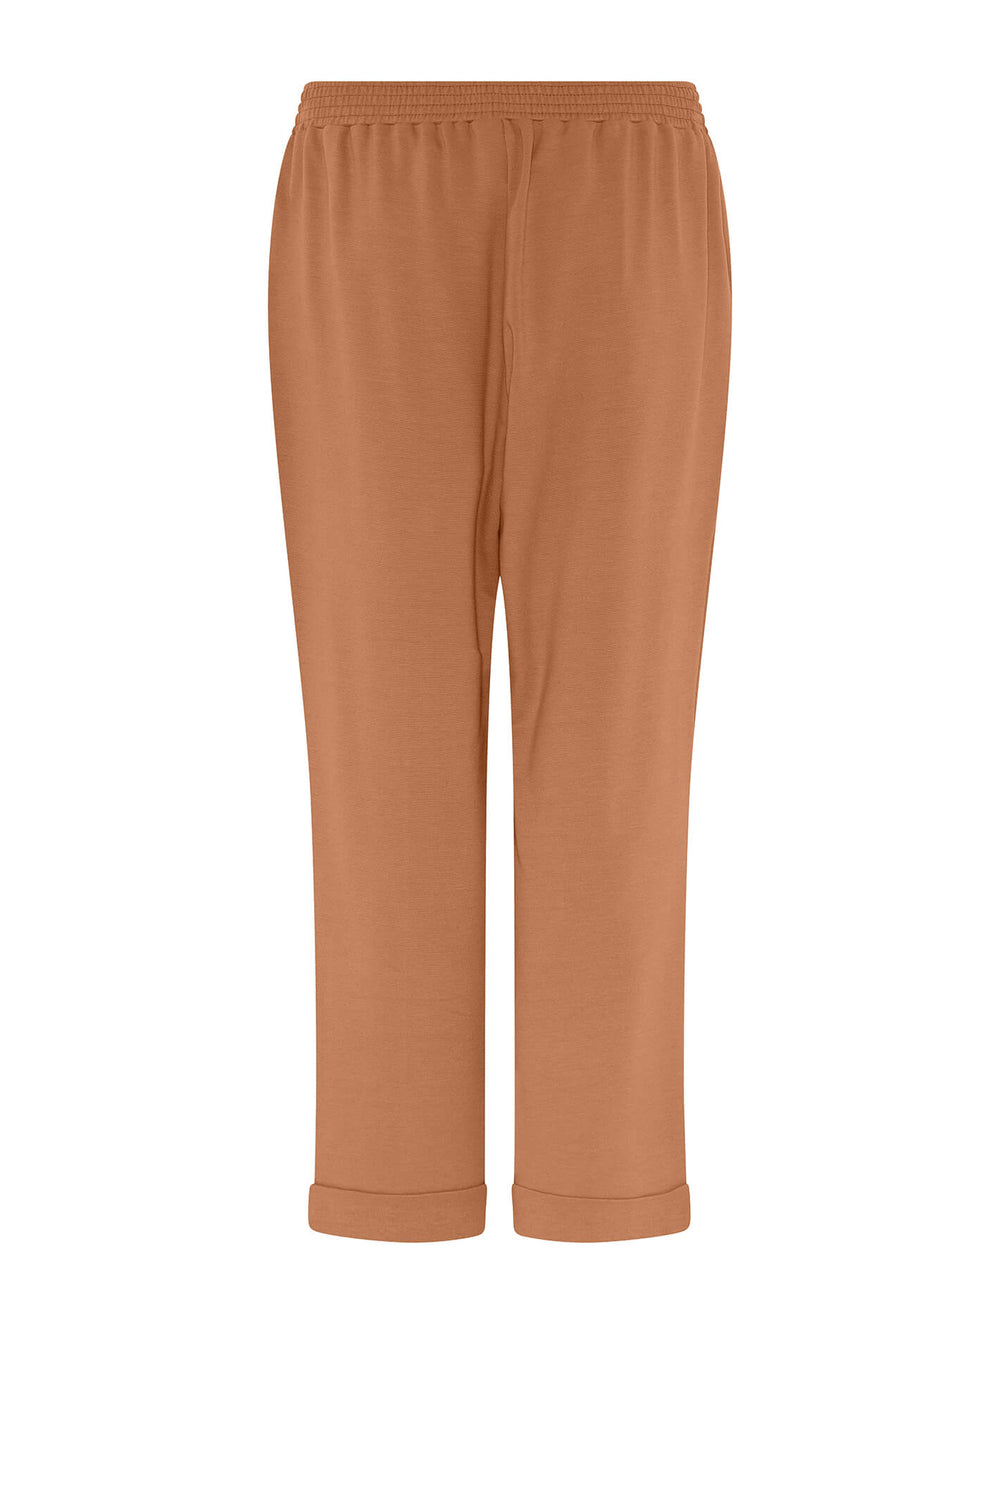 Que 31091 17 Tan Brown Pull On Trousers - Experience Boiutique